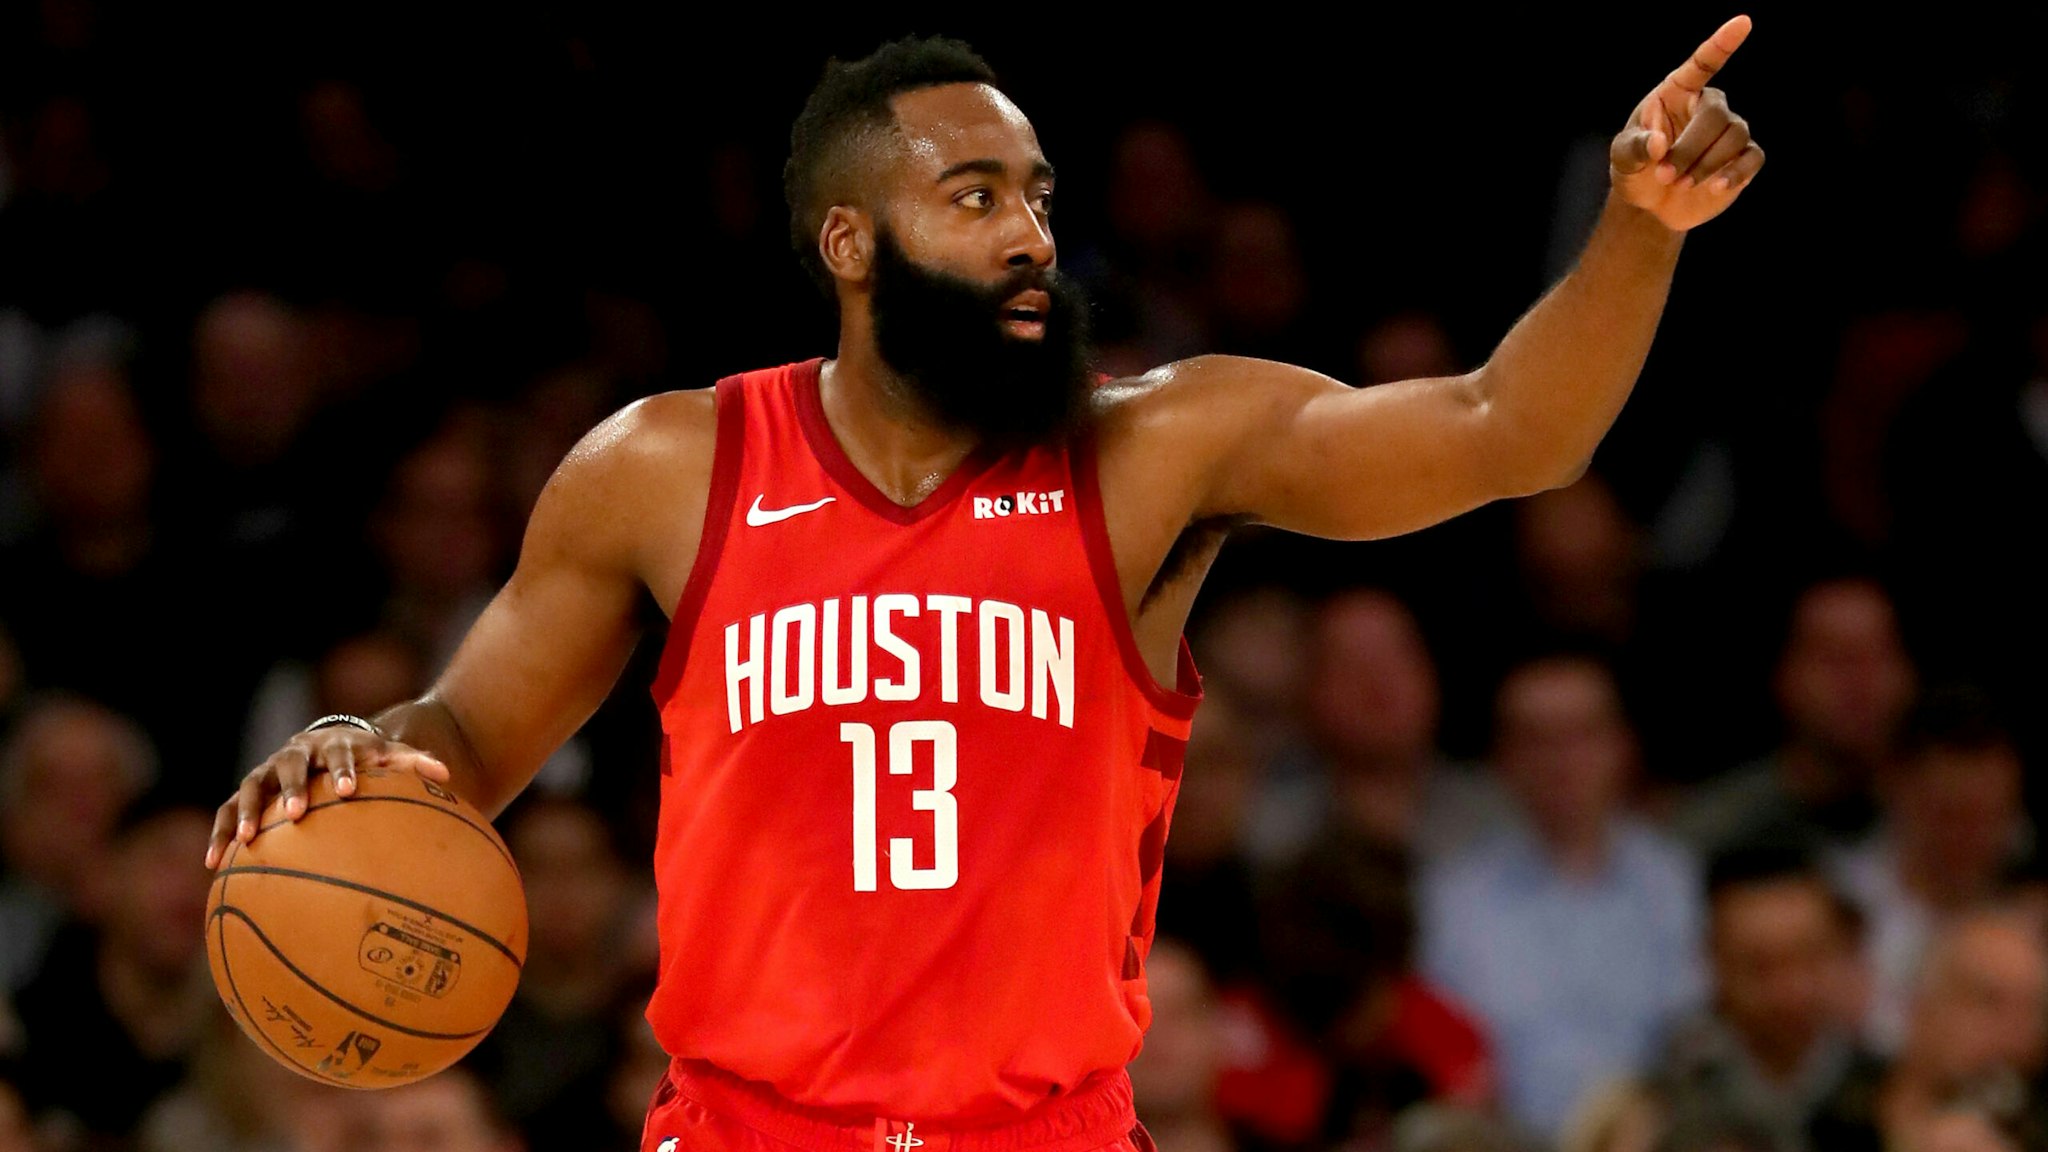 James Harden #13 of the Houston Rockets directs his teammates in the first quarter against the New York Knicks at Madison Square Garden on January 23, 2019 in New York City.